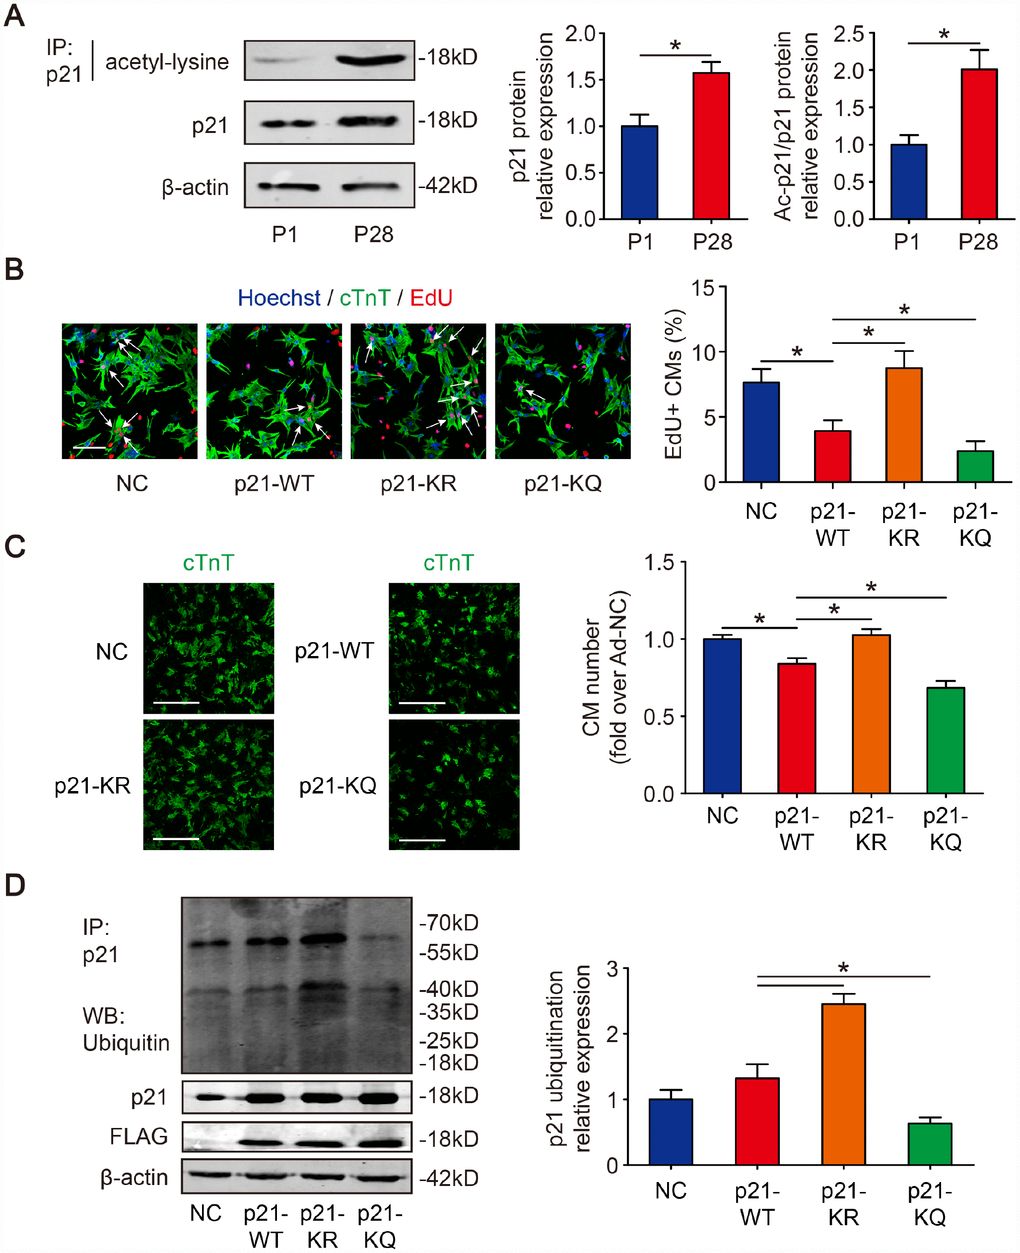 Deacetylation of p21 attenuates p21 stability and CM cell cycle arrest. (A) P1 and P28 mouse heart lysates were immunoprecipitated with a p21 antibody and analyzed by Western blotting with acetyl-lysine antibody; Western blotting was used to evaluate p21 protein expression in P1 and P28 mouse heart lysates. β-actin was used as a loading control (n=5). (B) Isolated P1 CMs were transfected with NC, p21-WT, p21-KR, or p21-KQ. EdU incorporation was detected by immunofluorescence. Scale bar, 50 μm. Quantitative analyses represent fields from 5 mice per group. (C) Isolated P1 CMs were transfected with NC, p21-WT, p21-KR, or p21-KQ and quantification of counts from P1 CMs transfected with NC, p21-WT, p21-KR, or p21-KQ (n=5). cTnT immunofluorescence was assessed to detect CM numbers. Scale bar, 500 μm. (D) Isolated P1 CMs were transfected with NC, FLAG-p21-WT, FLAG-p21-KR or FLAG-p21-KQ. Whole cell lysates were immunoprecipitated with a p21 antibody and analyzed by Western blotting with an ubiquitin antibodies; Western blotting was used to detect p21 levels. β-actin was used as a loading control (n=5). Statistical significance was calculated using a two-tailed unpaired Student’s t-test in (A) and a one-way ANOVA followed by an LSD post hoc test in (B–D). *p